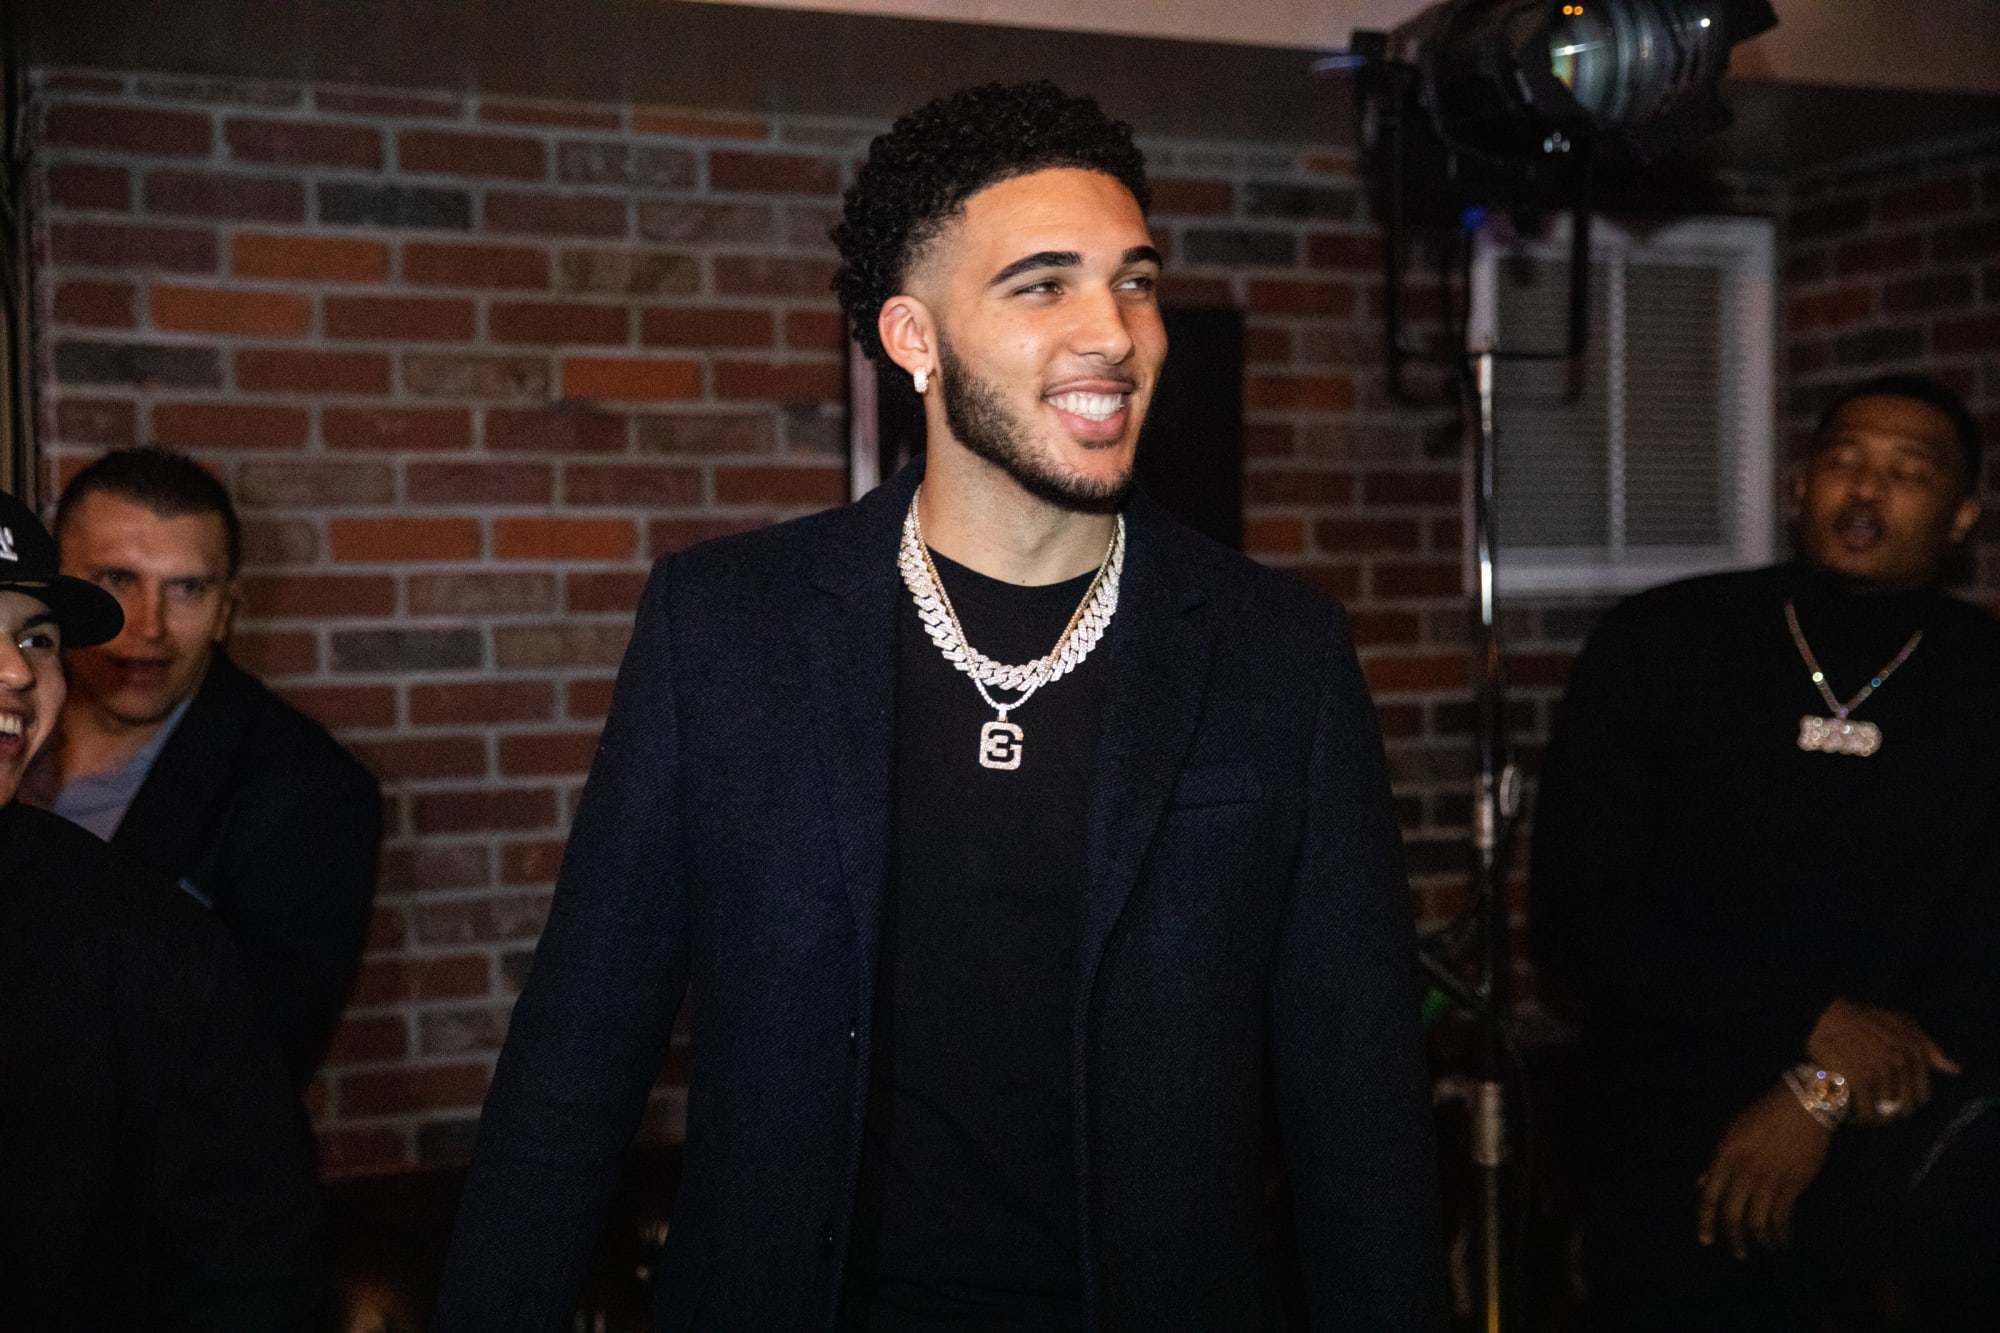 OKC Thunder: OKC Blue Guard LiAngelo Ball to sign with Roc Nation